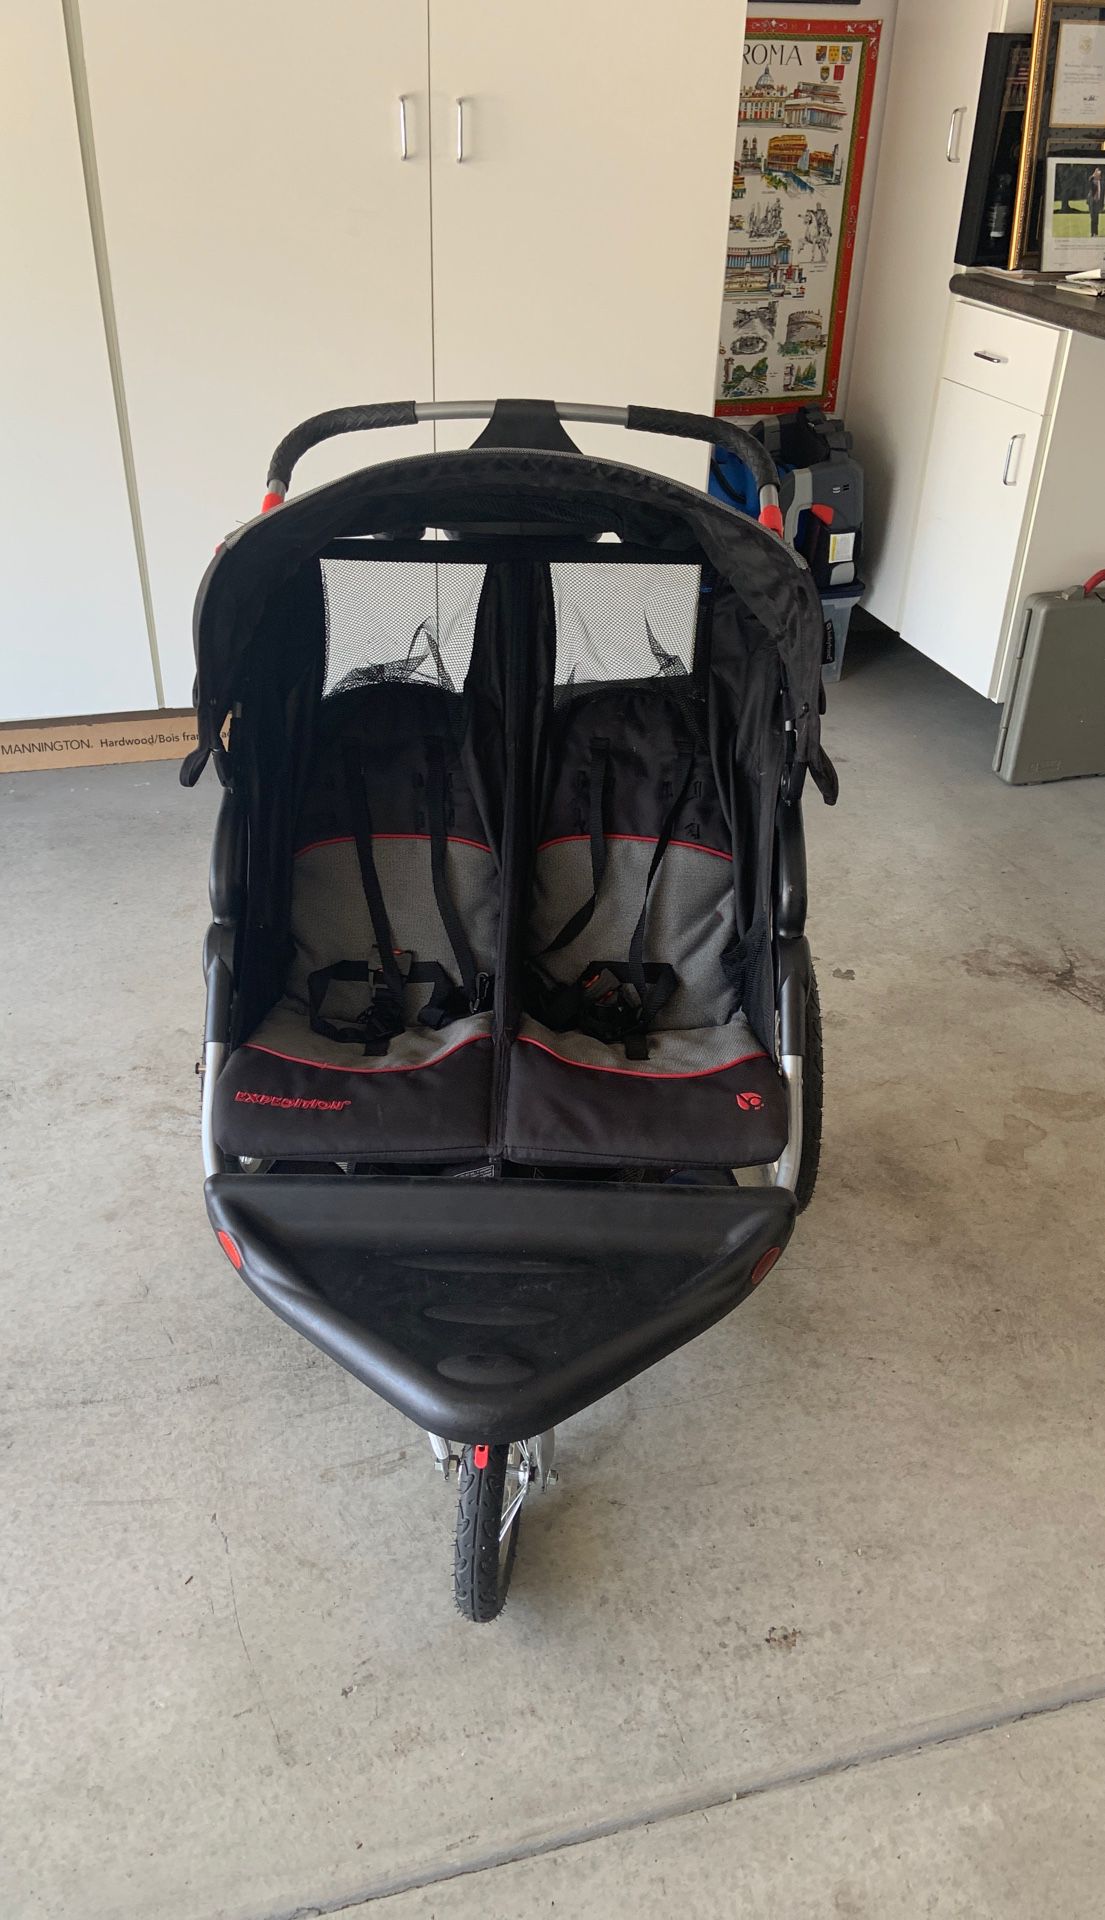 Baby trend expedition double stroller hardly used. New is 240. Three months old